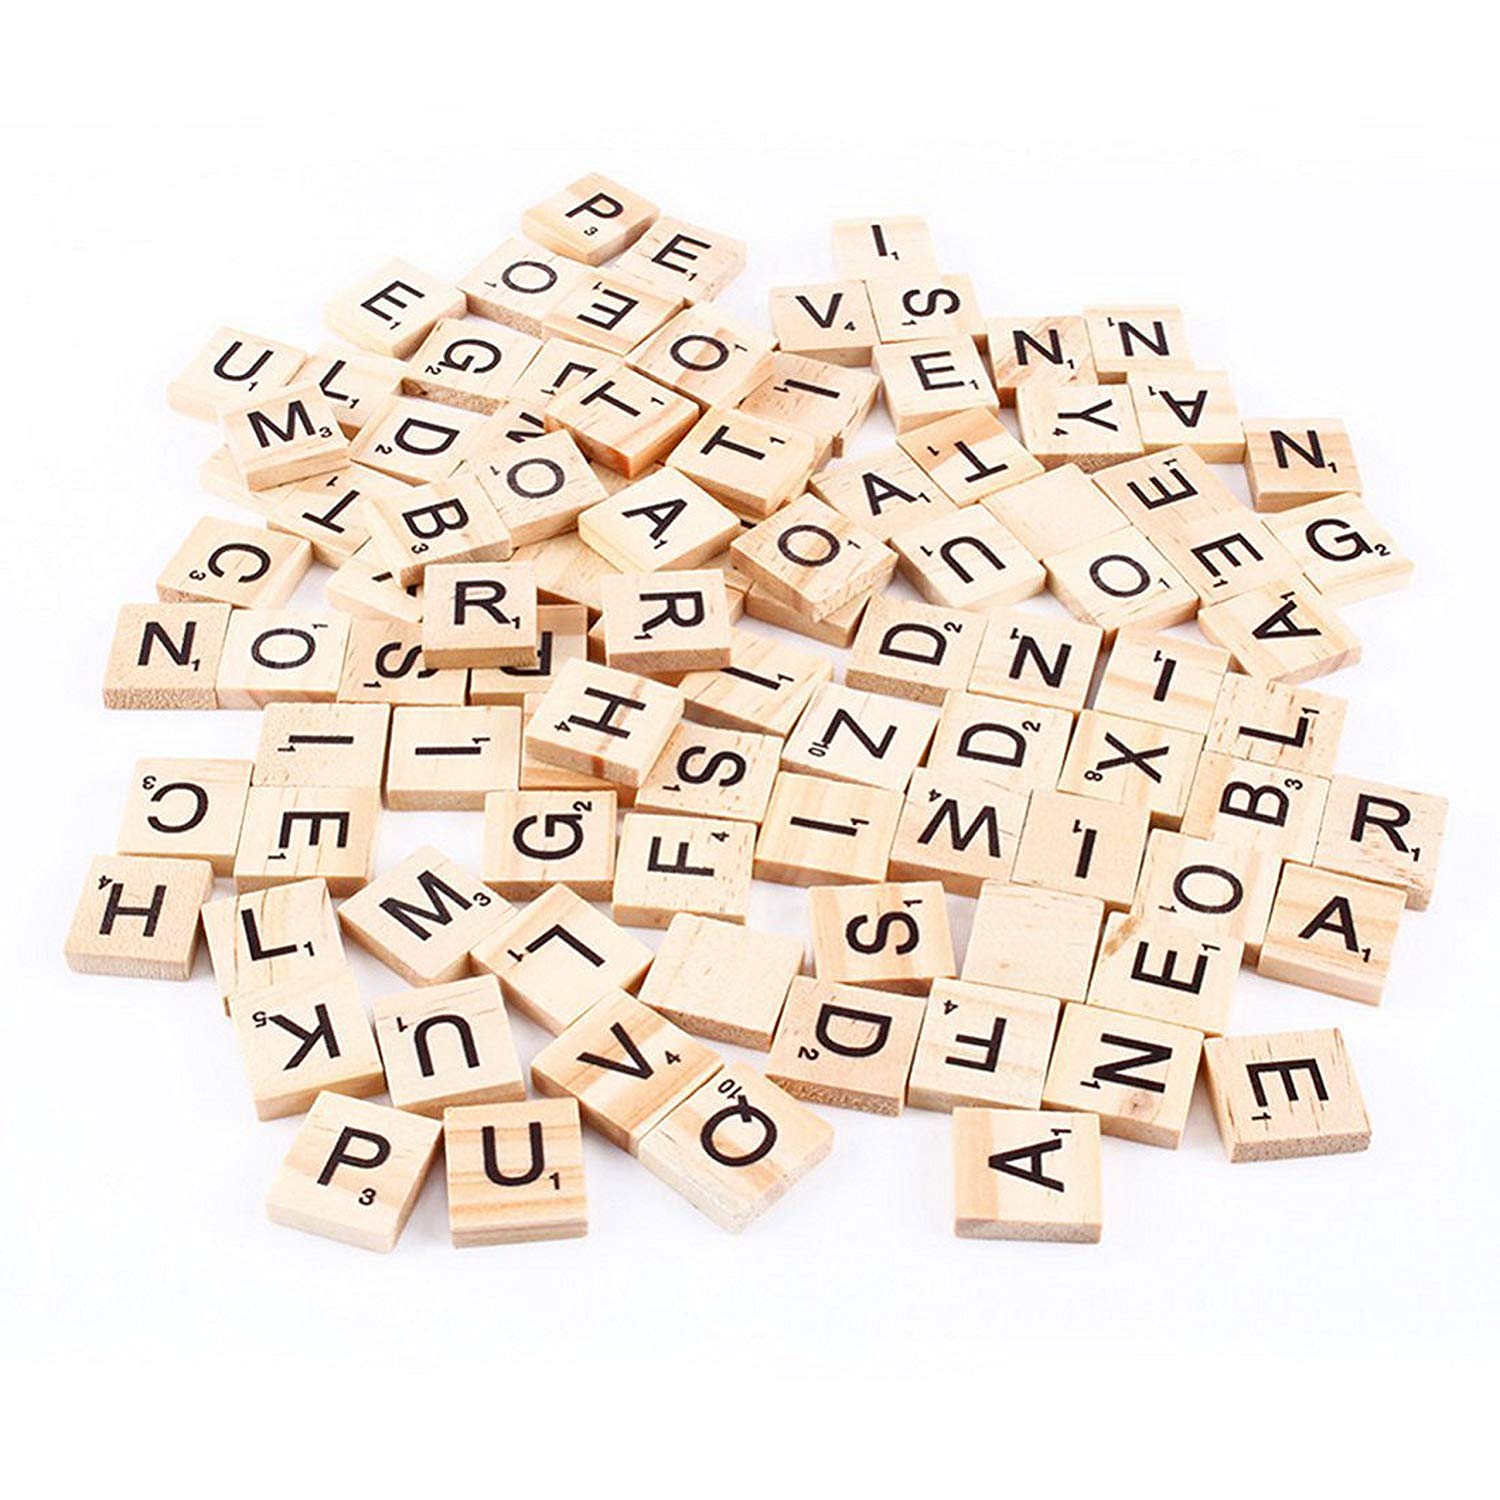 scrabble-tiles-100-count-only-1-99-perfect-for-diy-projects-become-a-coupon-queen